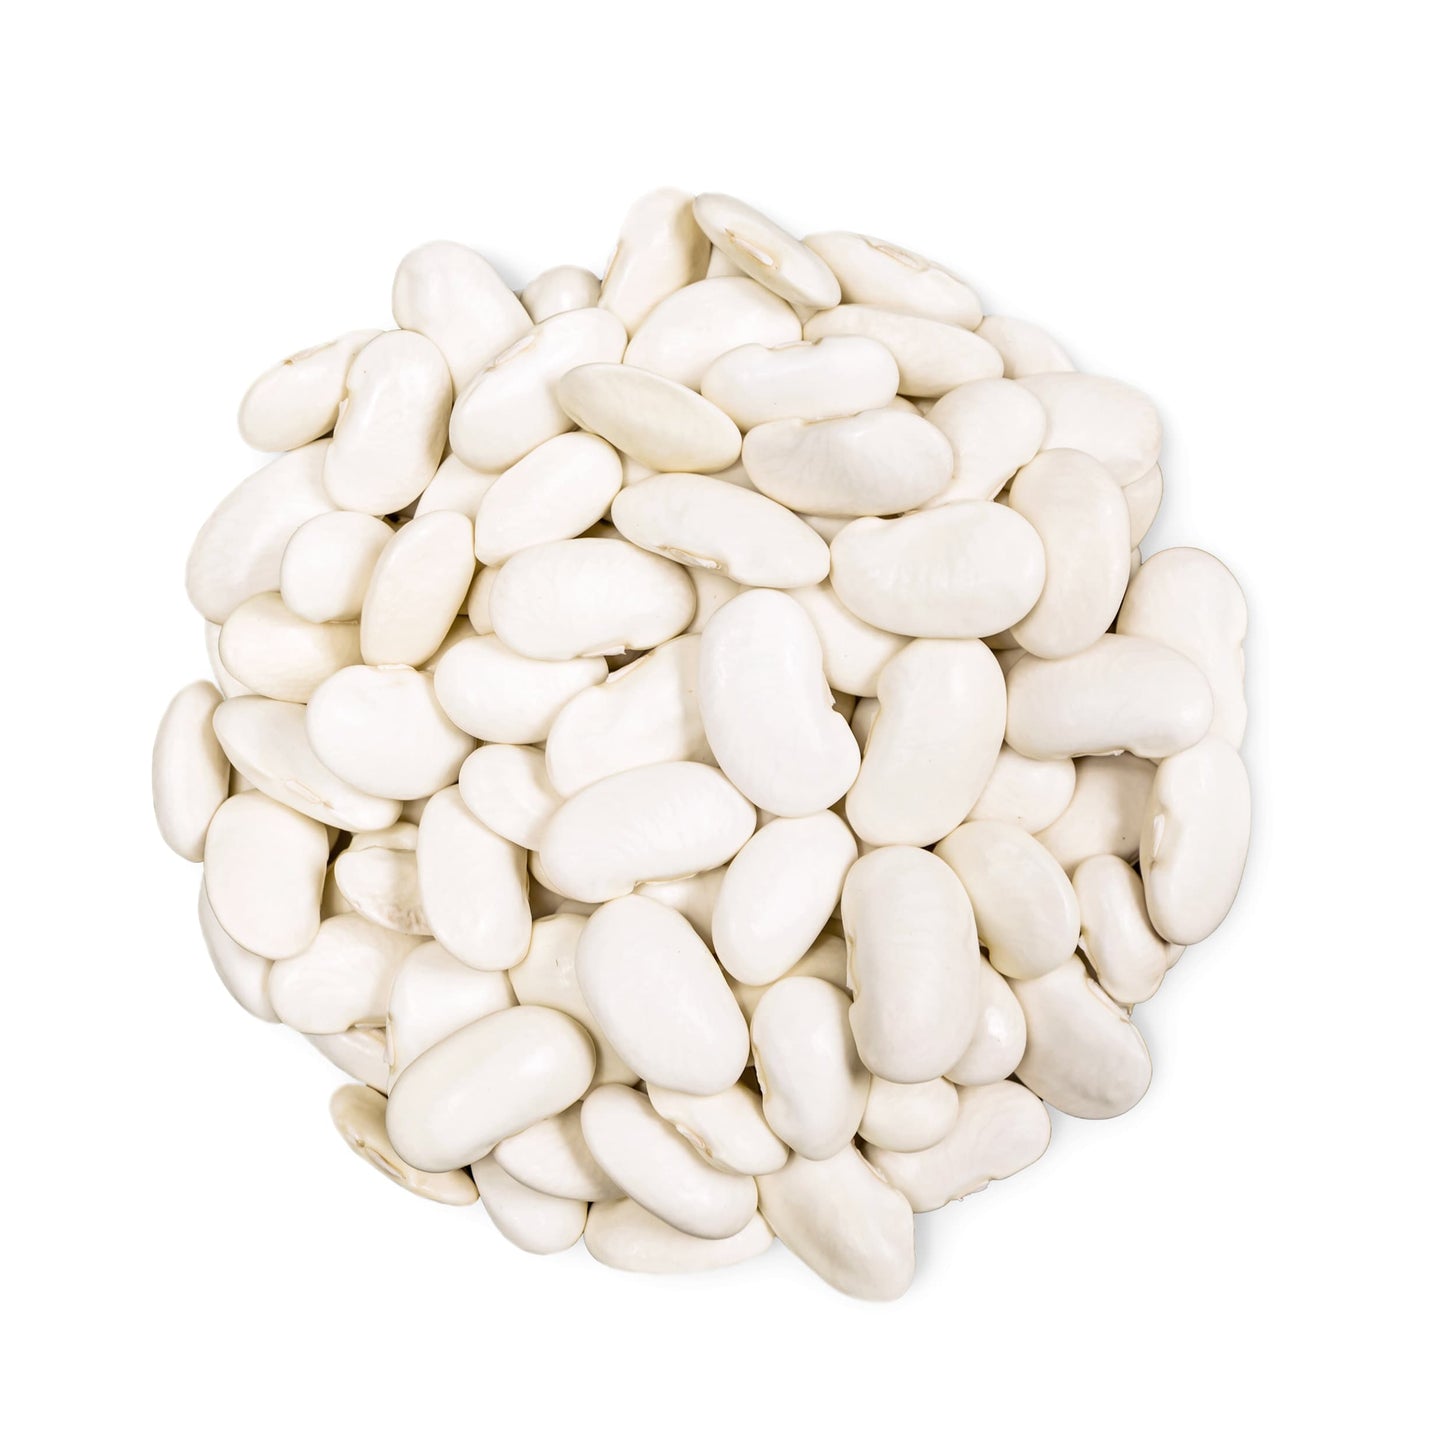 Organic Large White Kidney Beans — Whole Raw Dried Beans, Vegan, Kosher, Bulk. Rich in Dietary Fiber and Protein. Perfect for Soups, Stews, Chili, Paste, Salads and Side Dishes